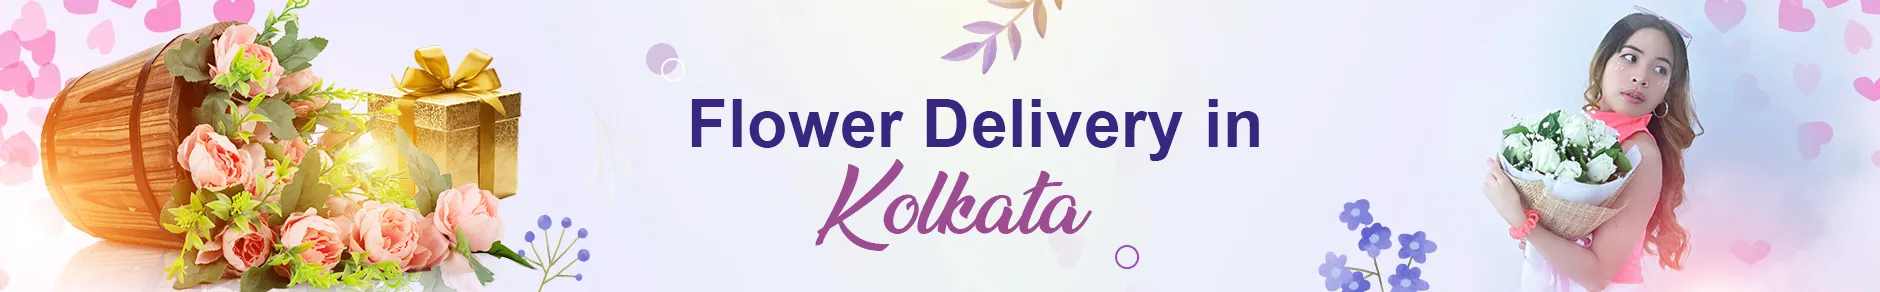 Flower Delivery in Kolkata | Send Flowers to Kolkata in 2 hours | Free Delivery